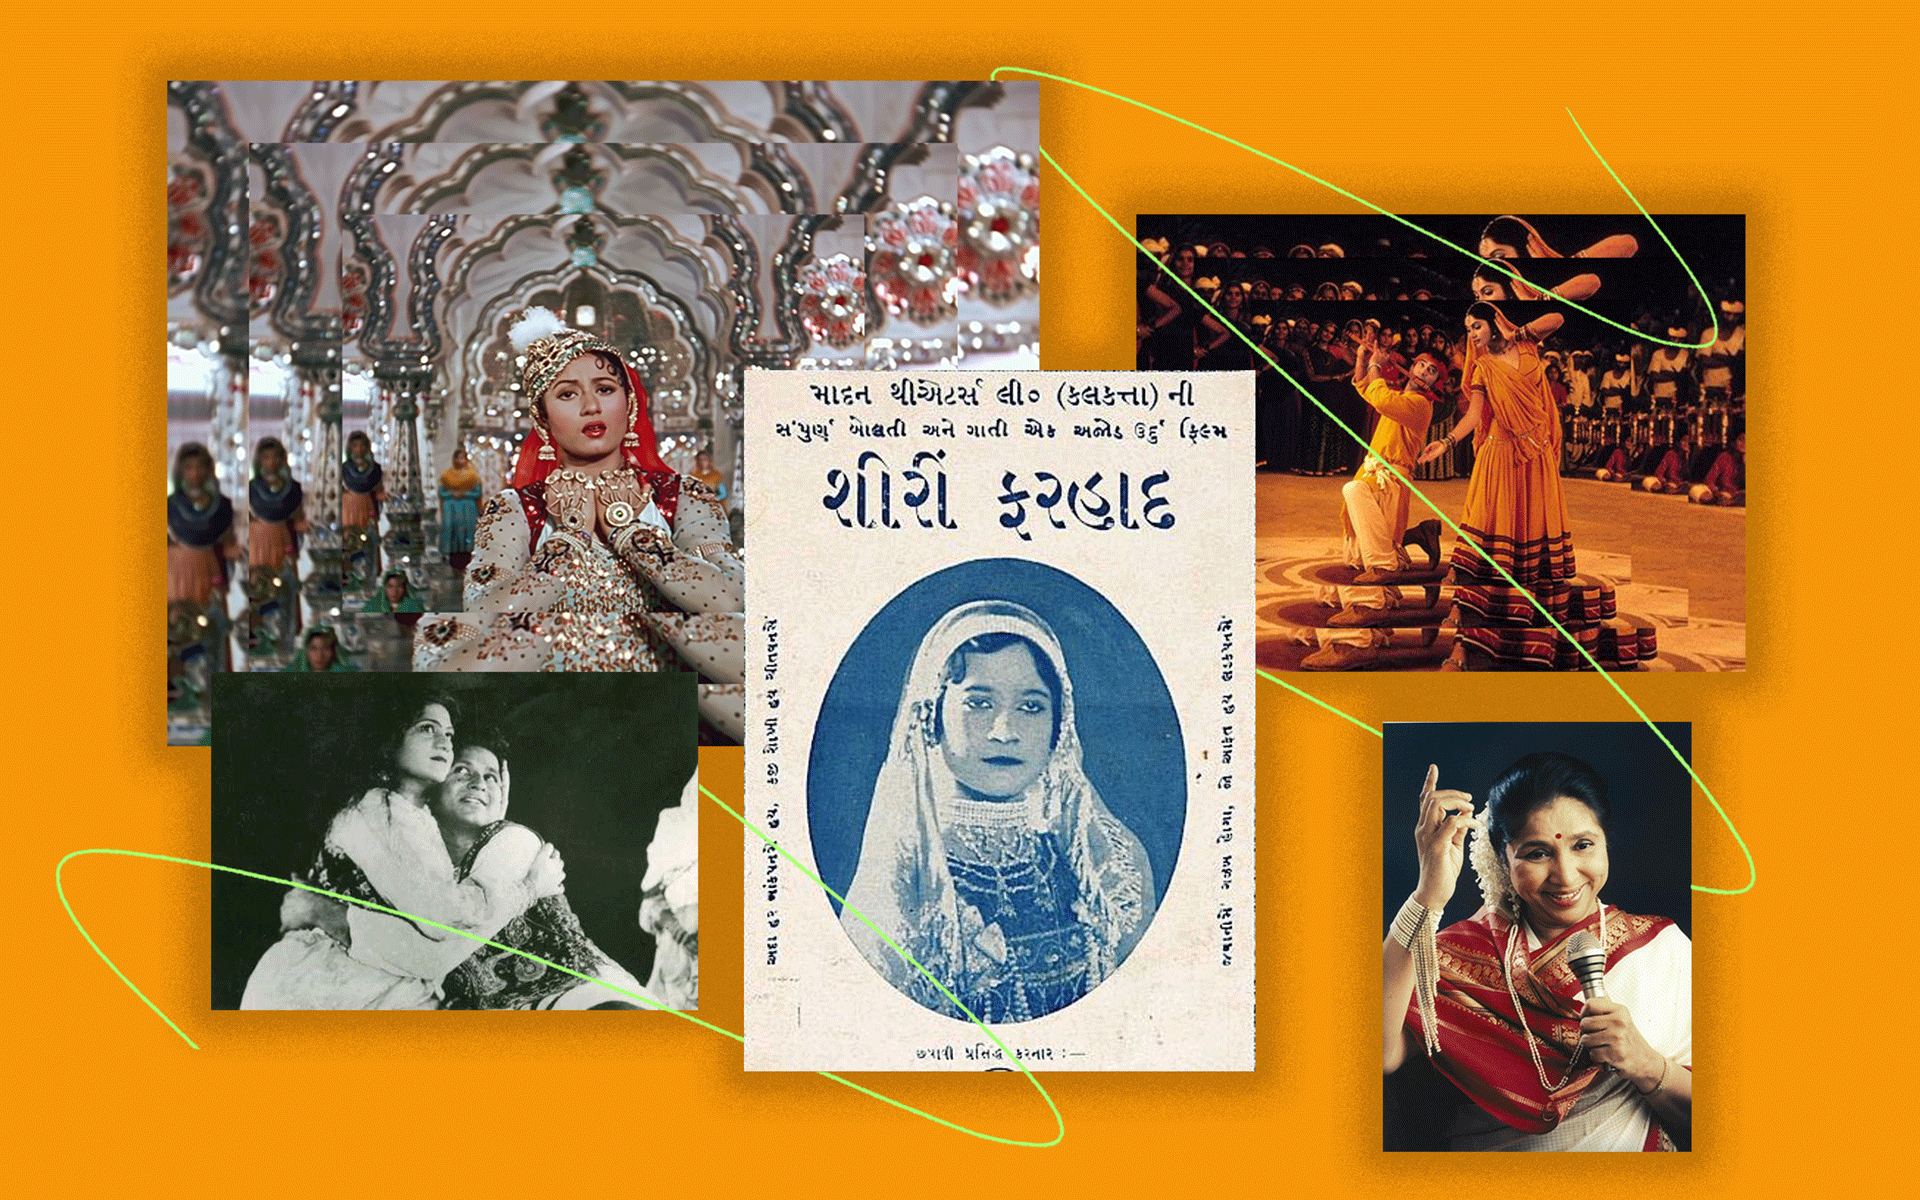 III. The Influence of Classical Indian Music